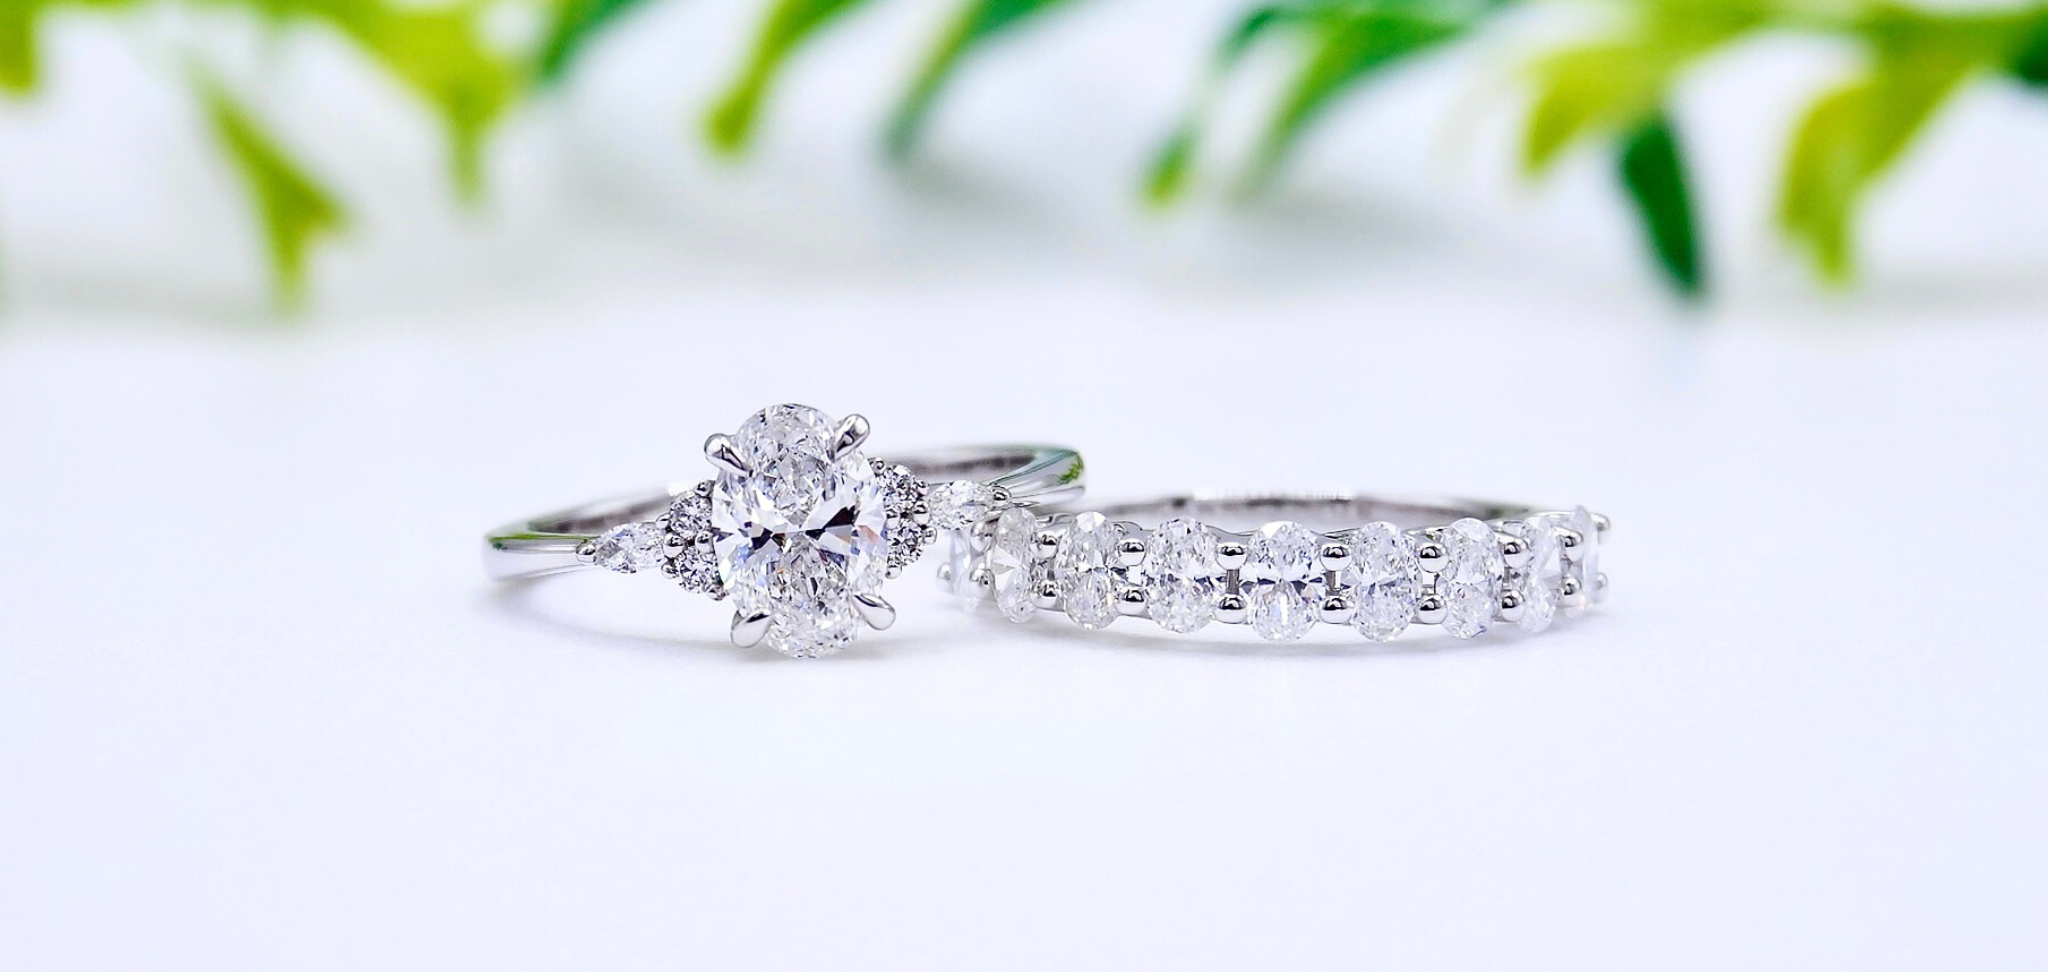 Engagement Ring vs. Wedding Ring - What's the Difference? – Lucce